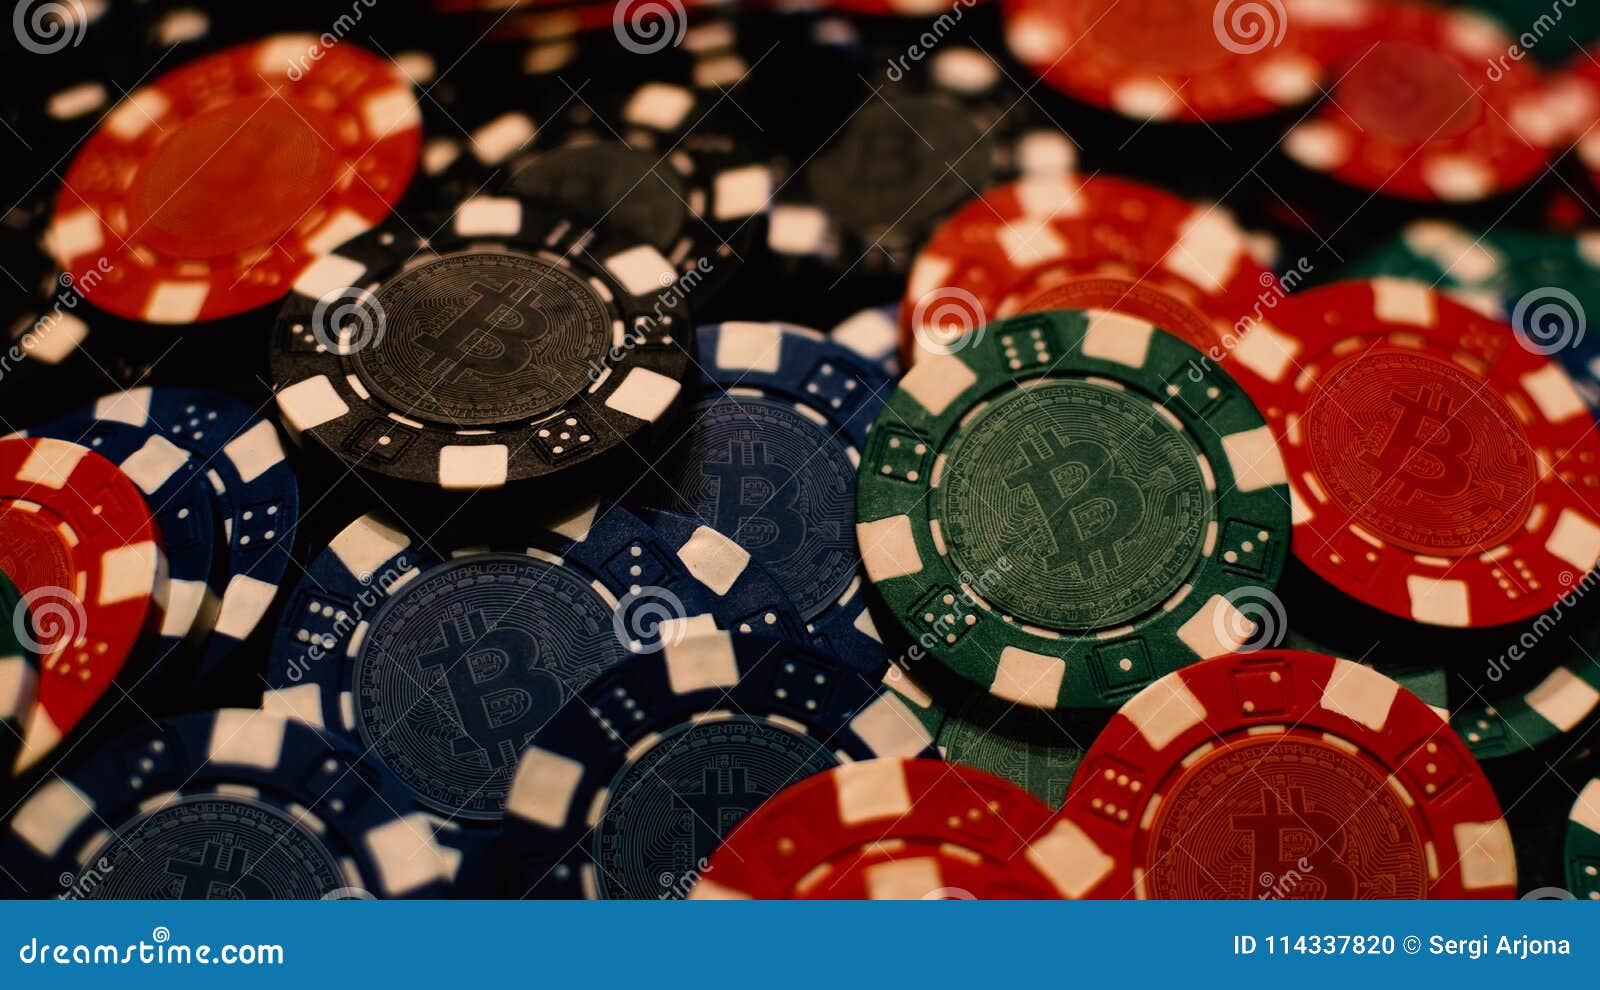 Five Rookie top btc casino sites Mistakes You Can Fix Today